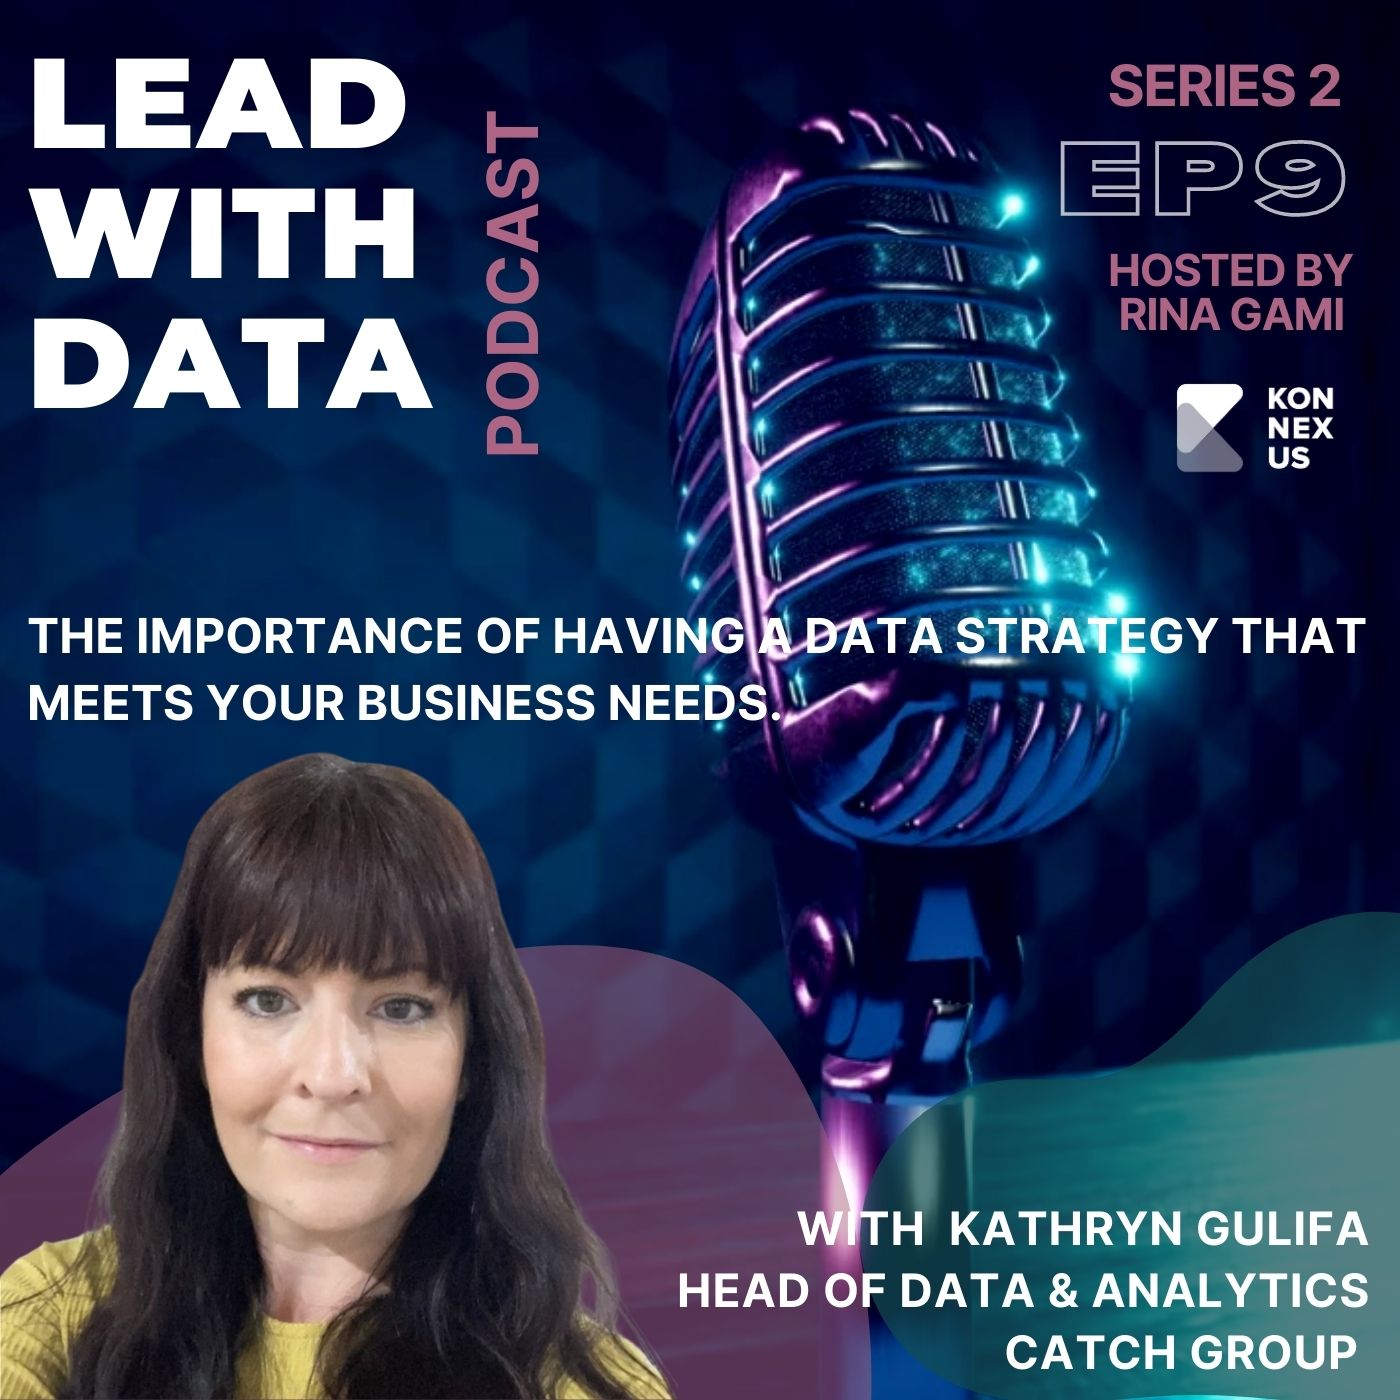 Season 2 - Episode 9 - The importance of having a Data Strategy that meets your business needs